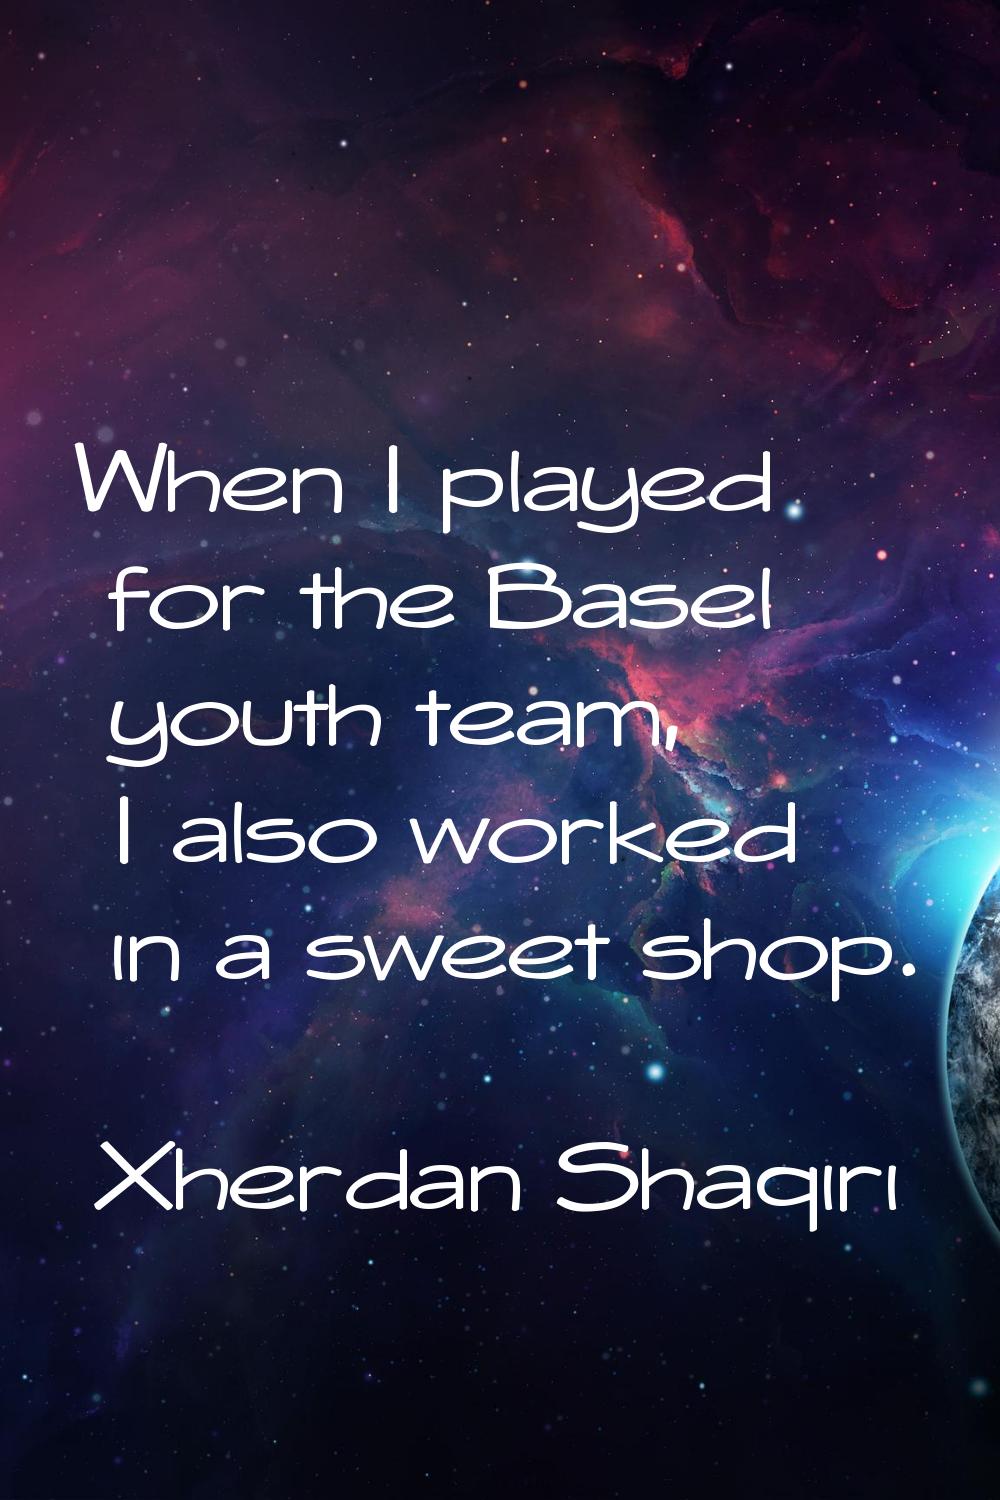 When I played for the Basel youth team, I also worked in a sweet shop.